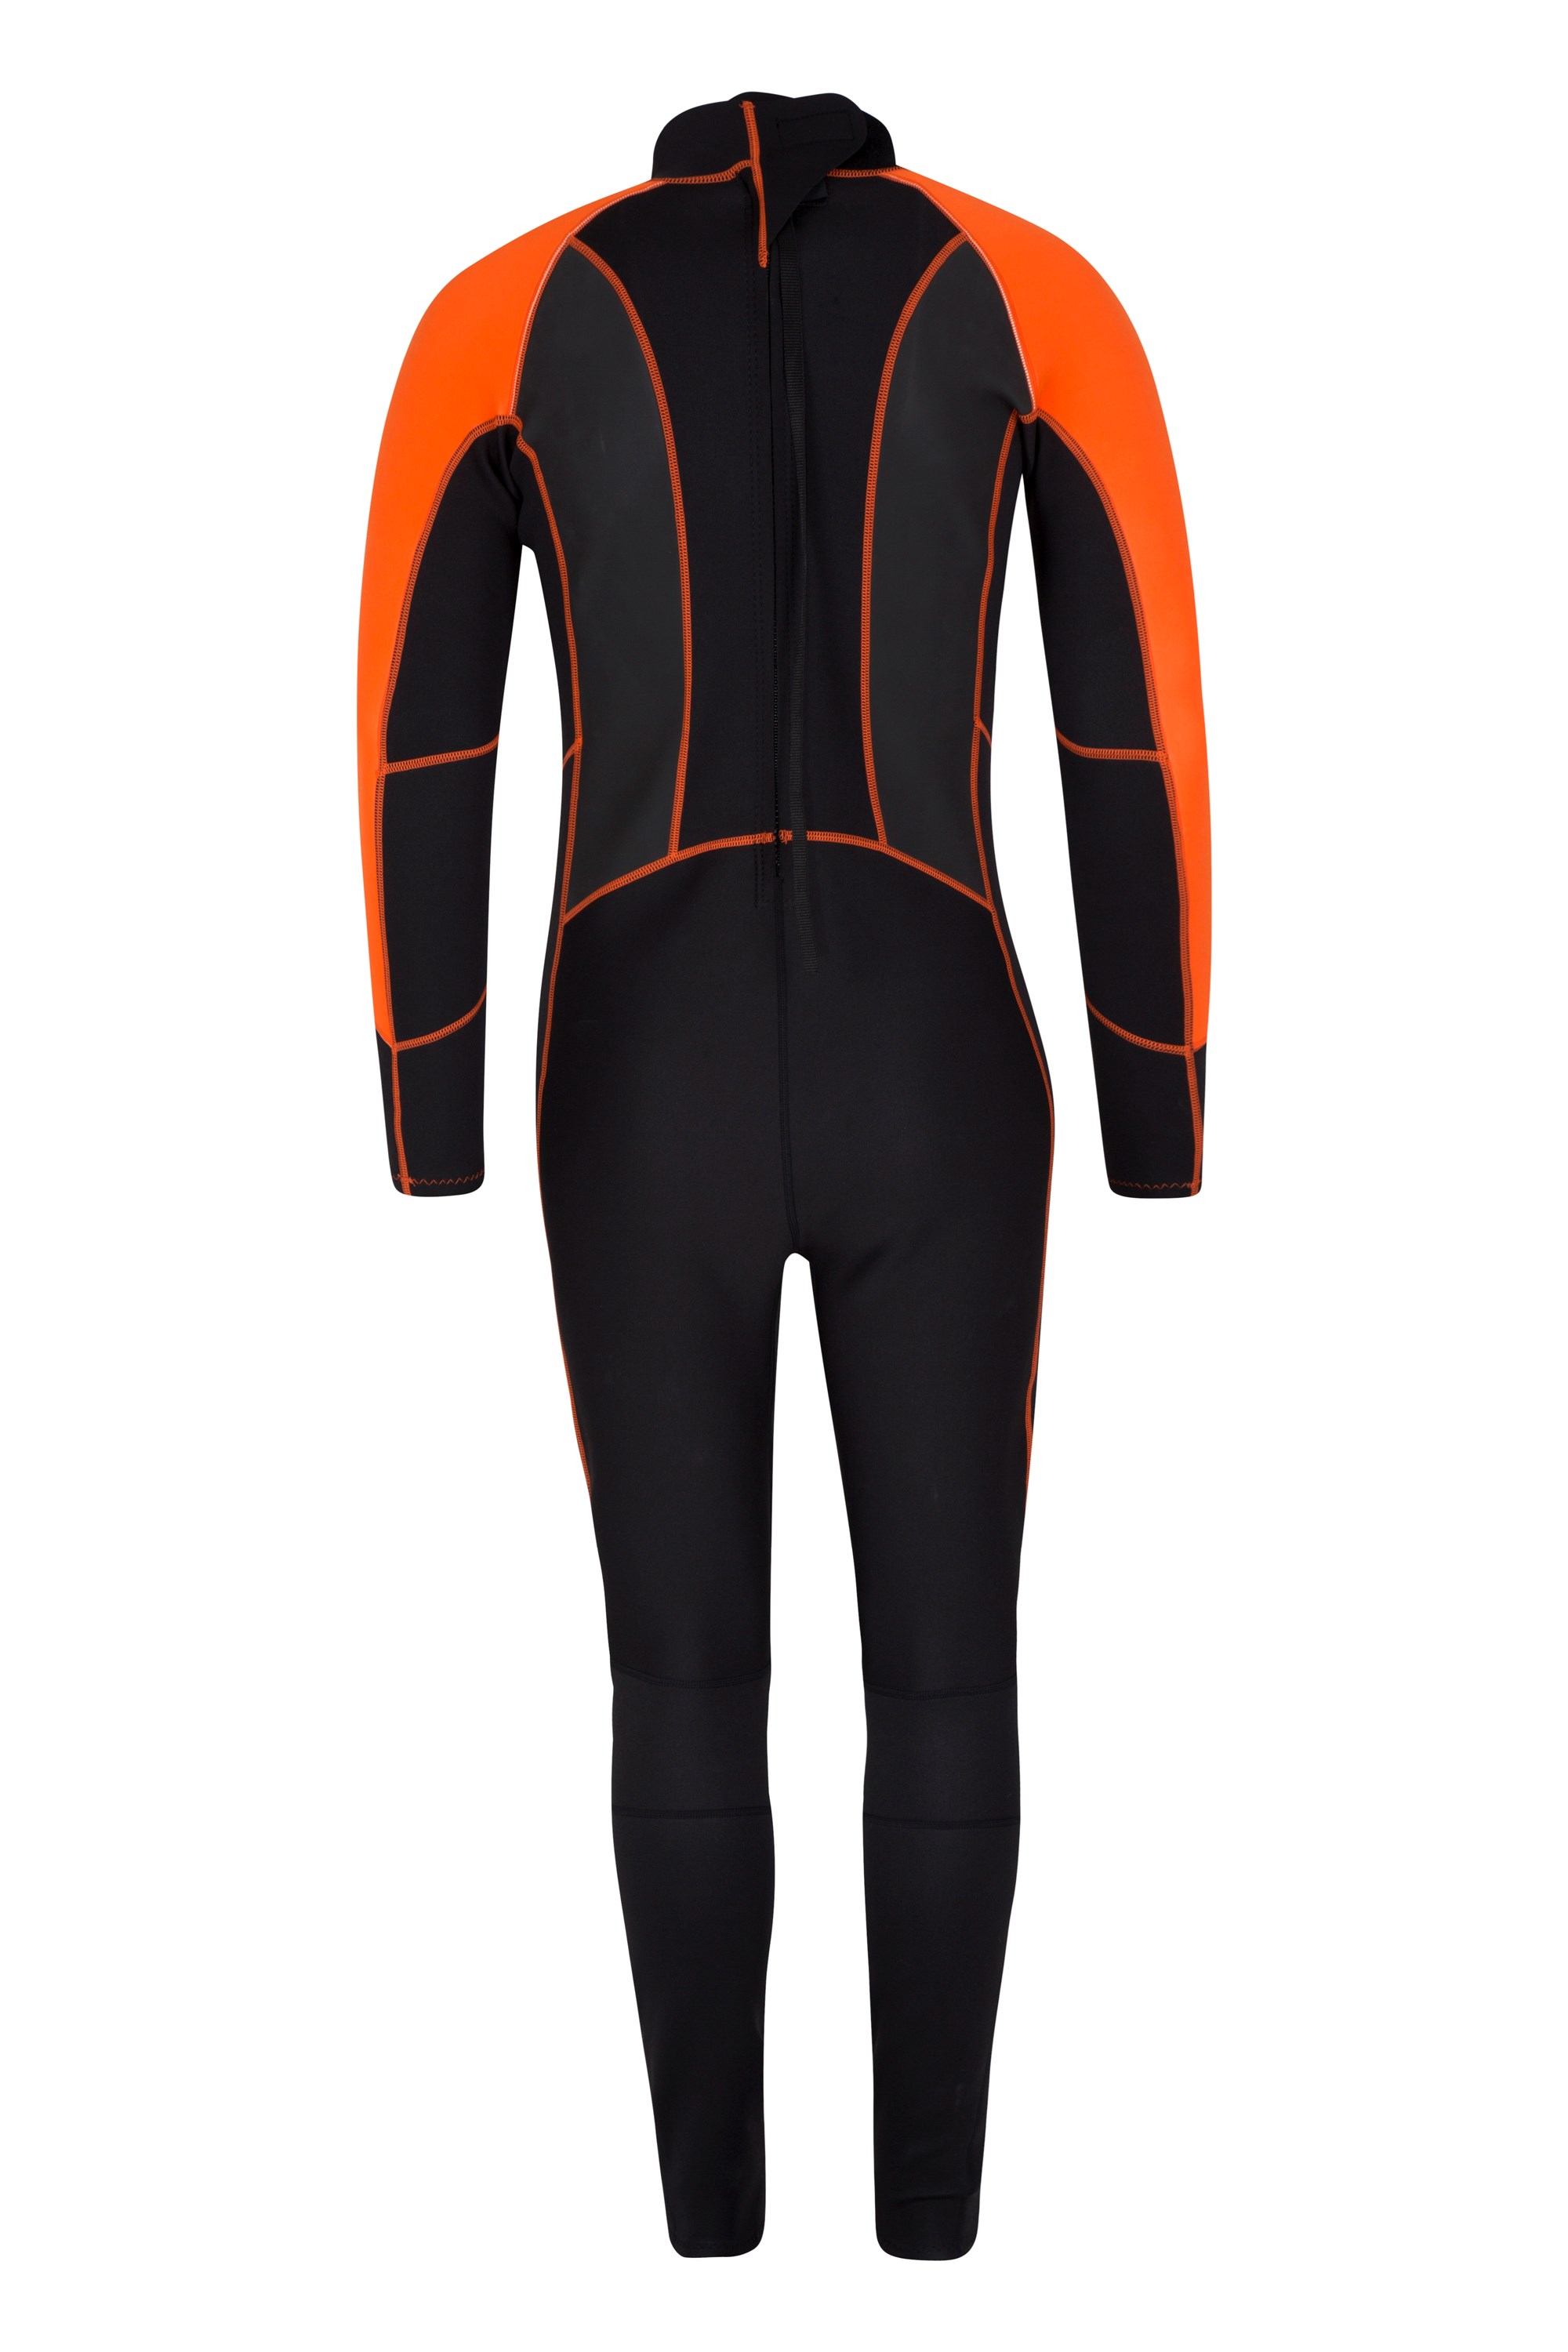 Wetsuit for Fishing  Wetsuit Wearhouse Blog